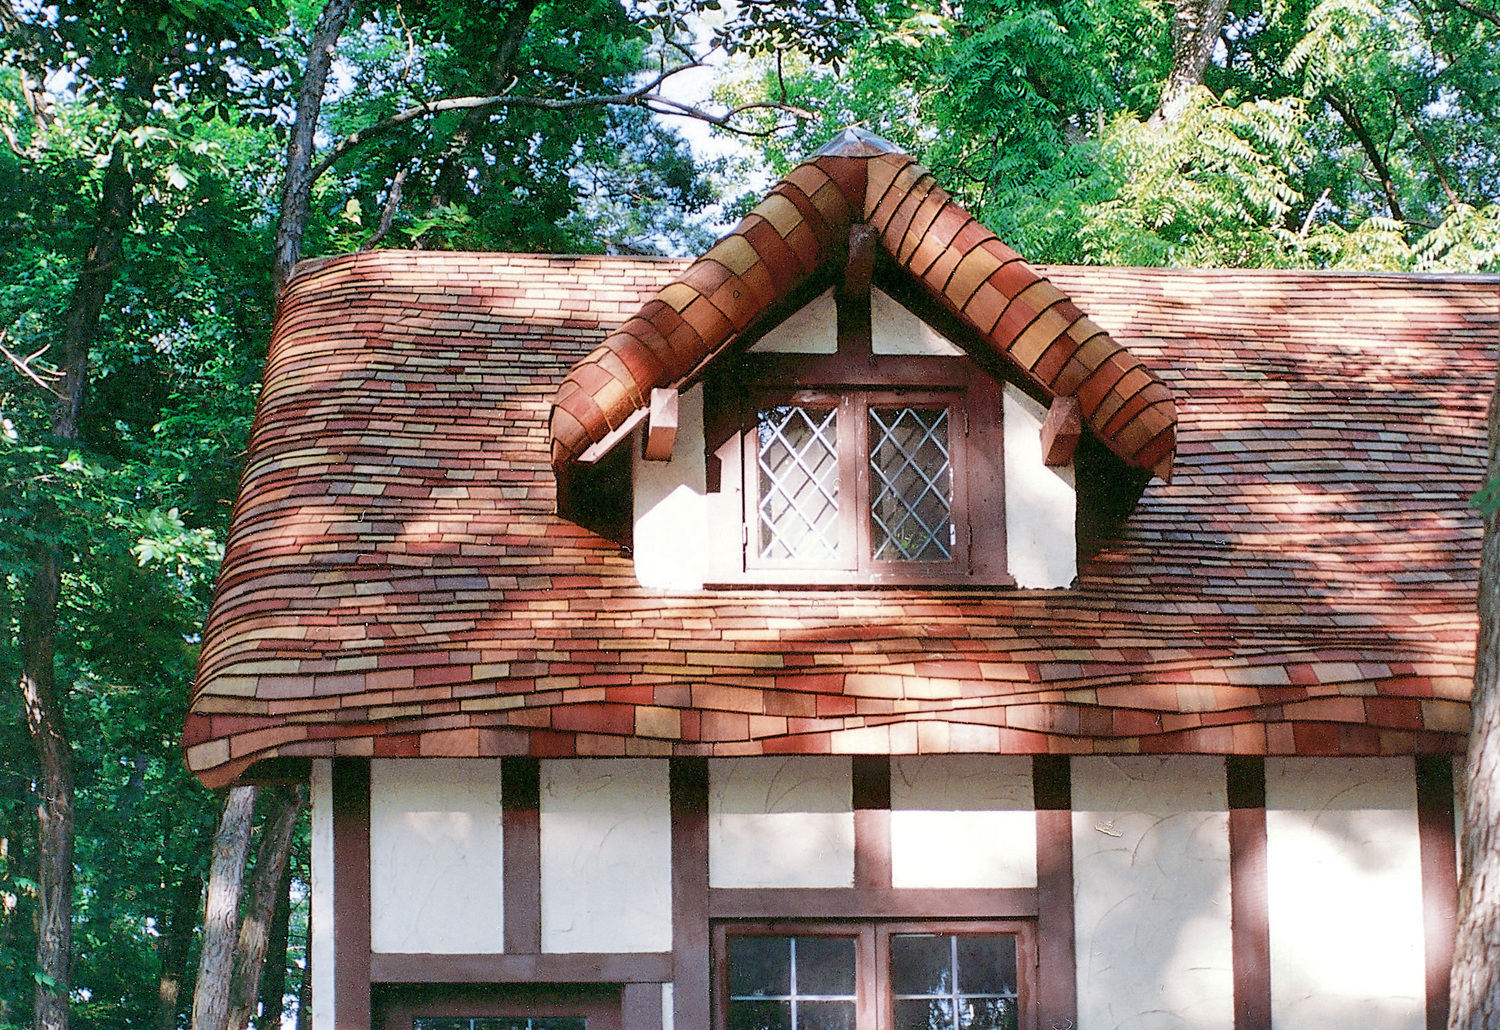 False-Thatched Roofing